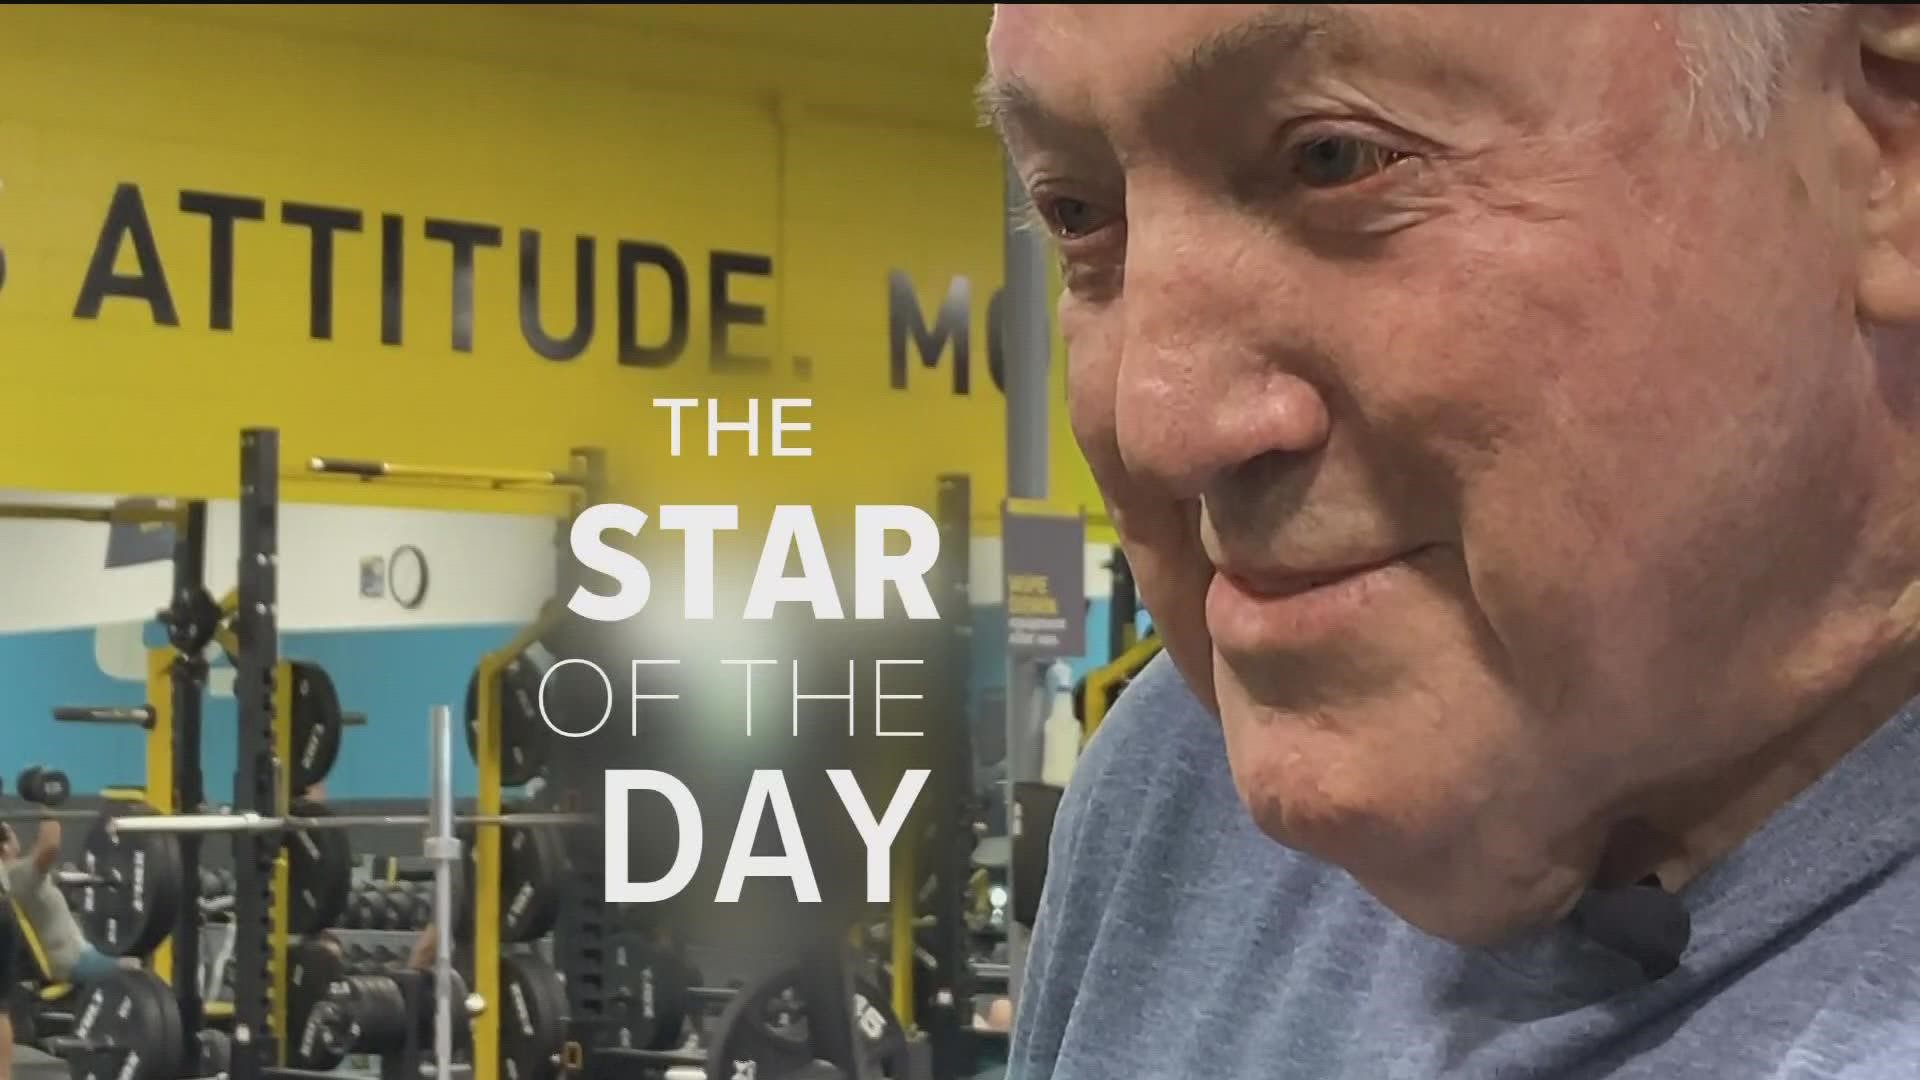 80-year-old Les Burge works out daily despite huge health challenges.